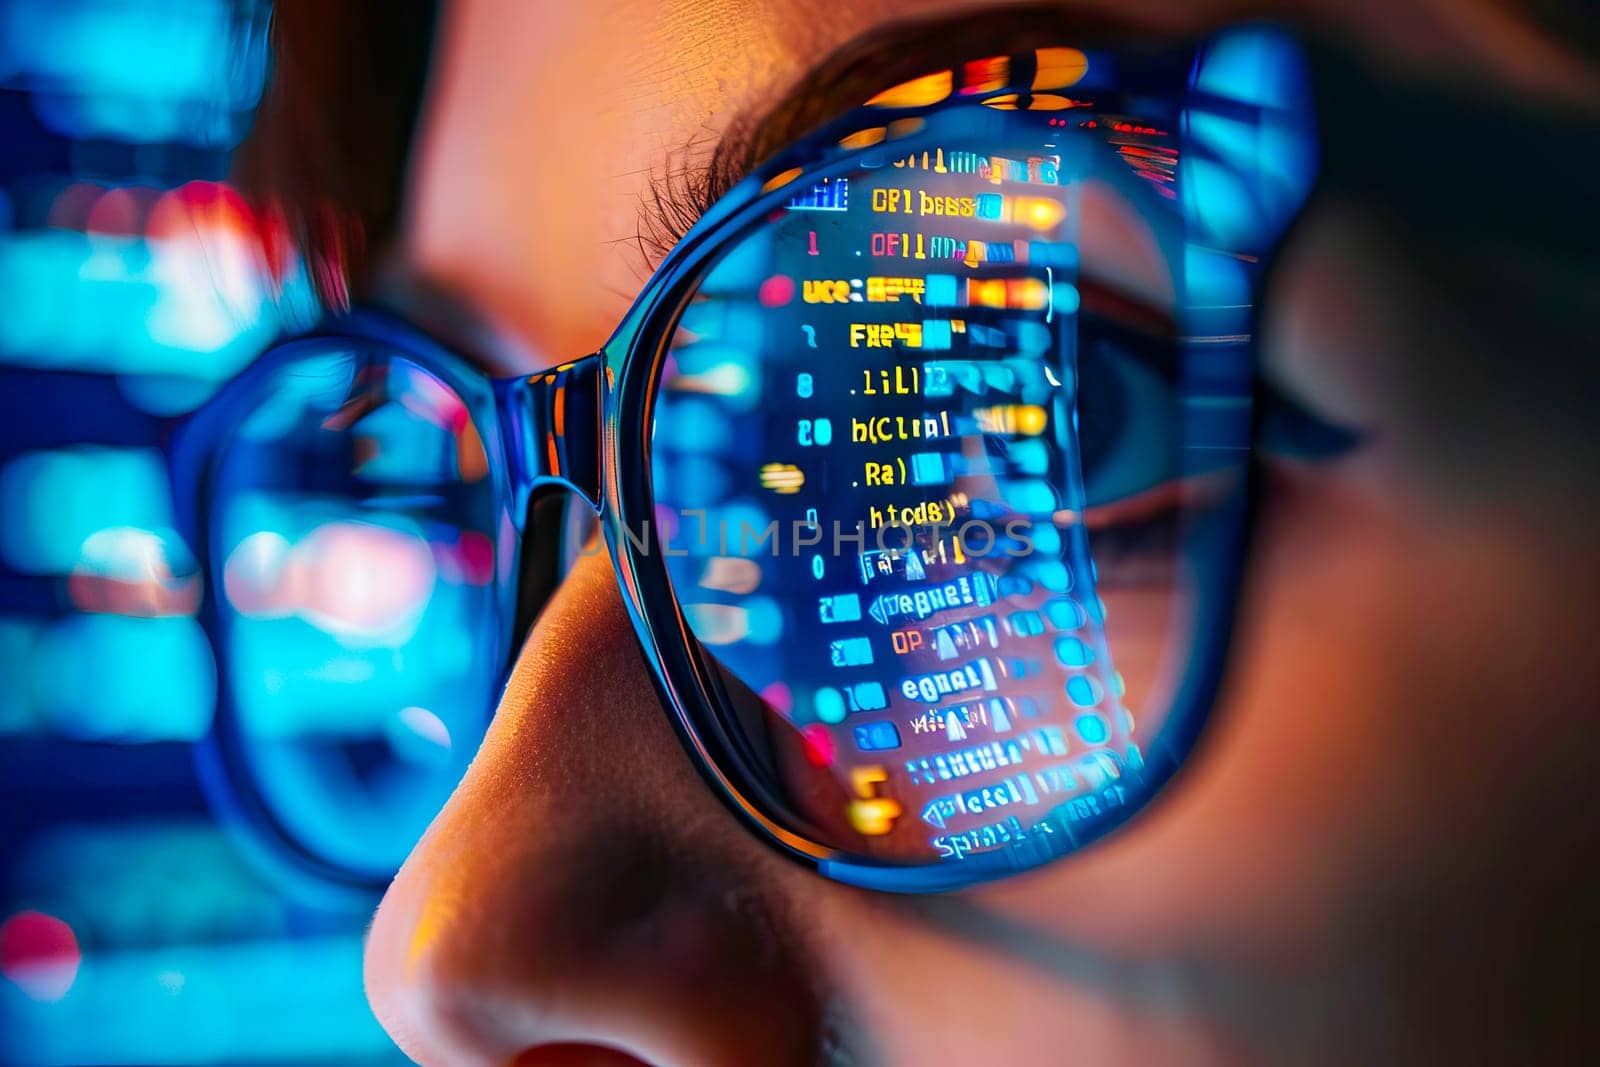 A close-up view of a person wearing a pair of glasses, with their eyes and a computer monitor in the background. by vladimka